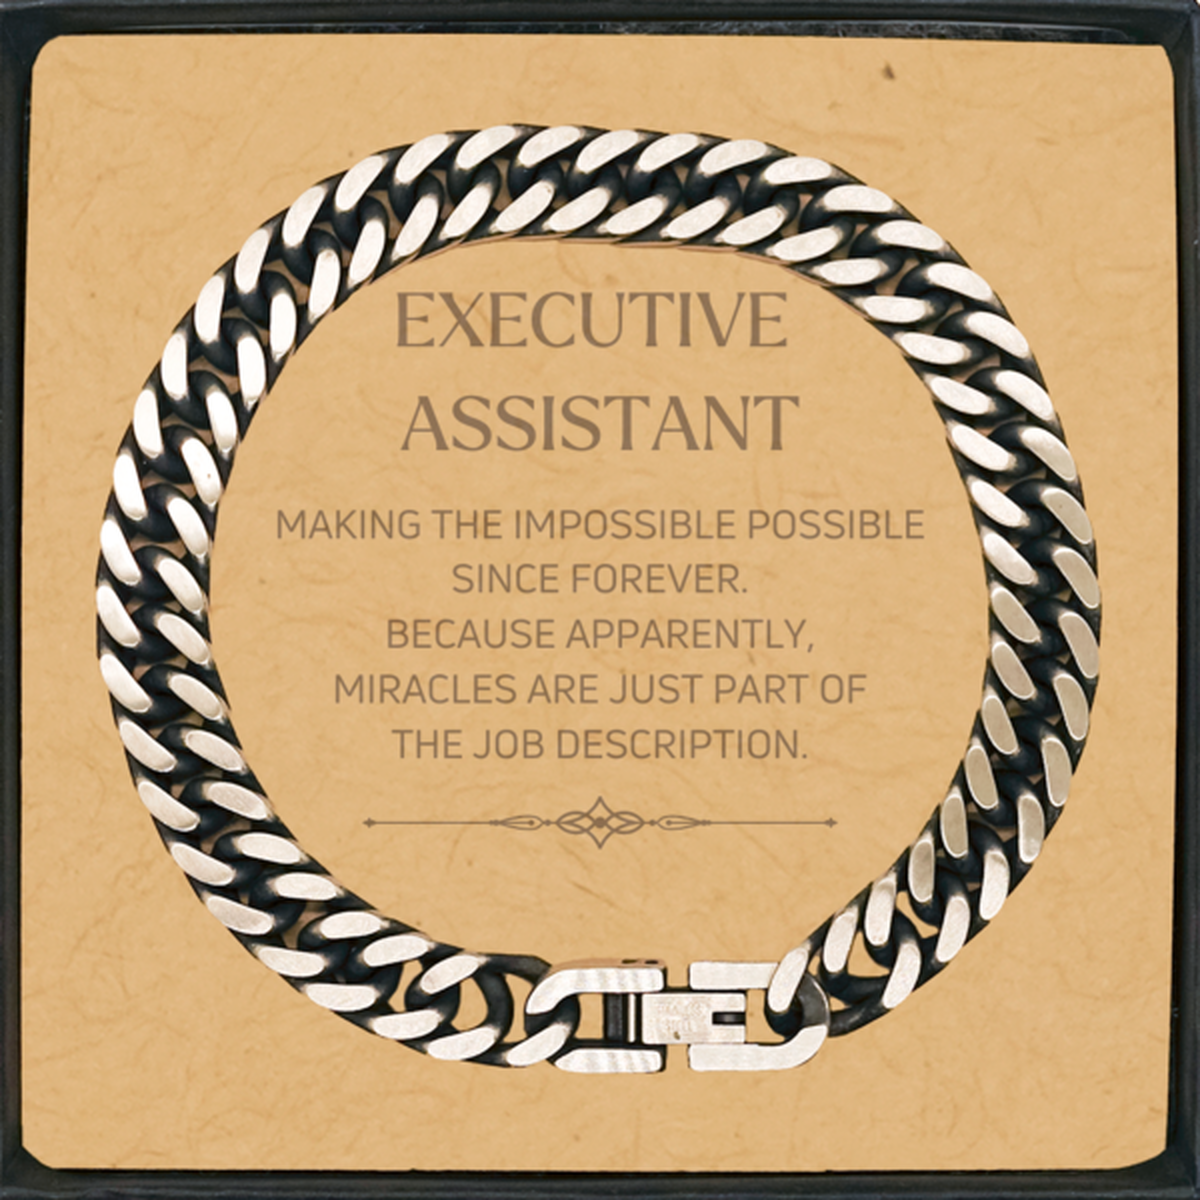 Funny Executive Assistant Gifts, Miracles are just part of the job description, Inspirational Birthday Cuban Link Chain Bracelet For Executive Assistant, Men, Women, Coworkers, Friends, Boss